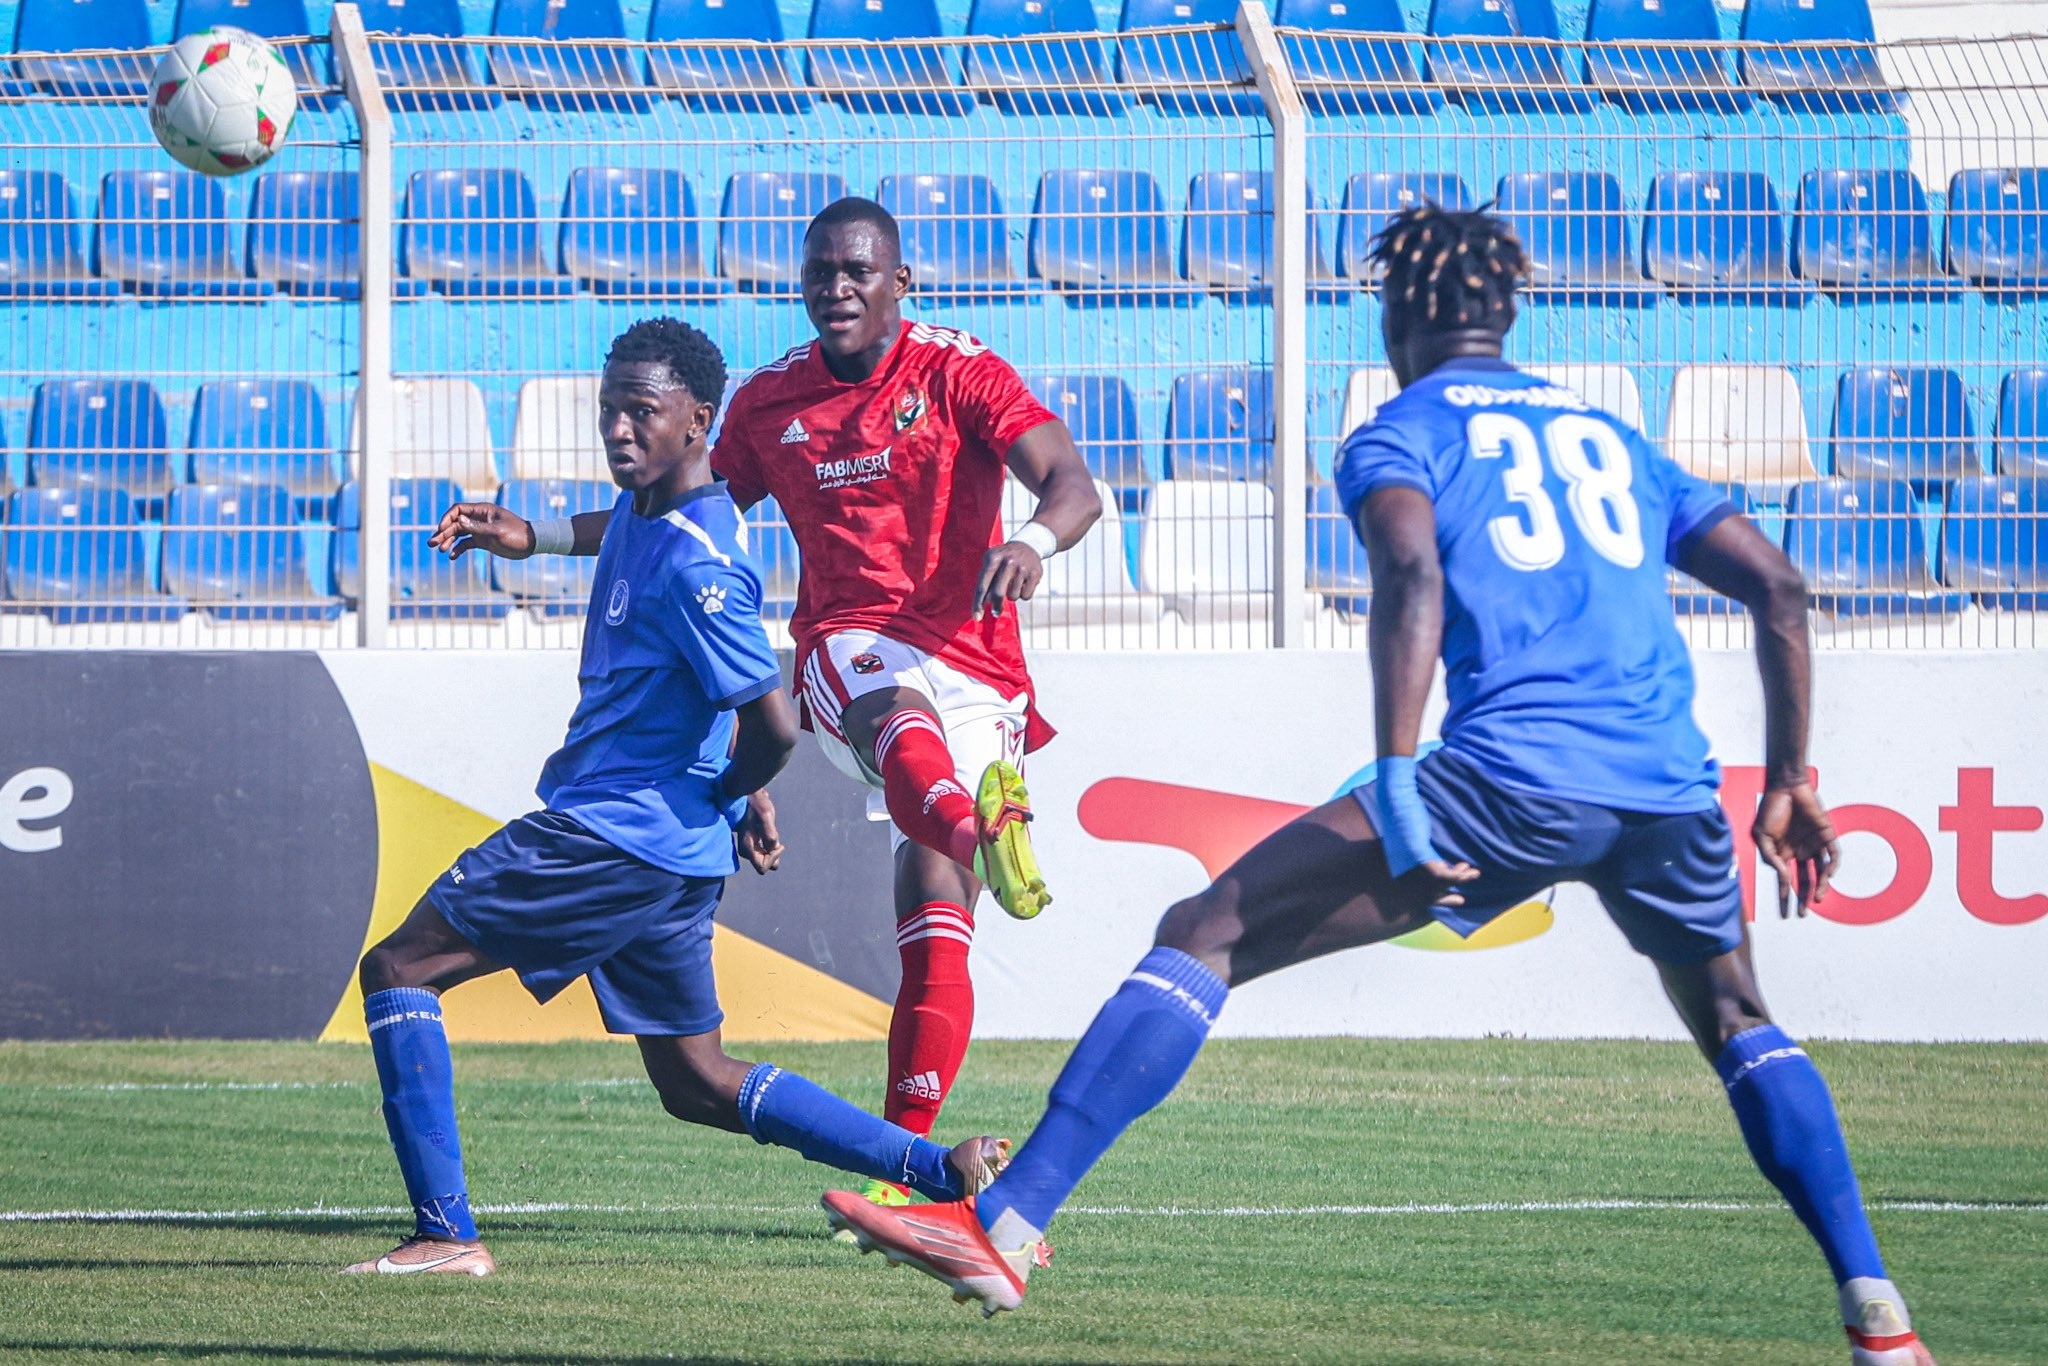 Al-Hilal of Sudan defeats Al-Ahly of Egypt with a “sunstroke”